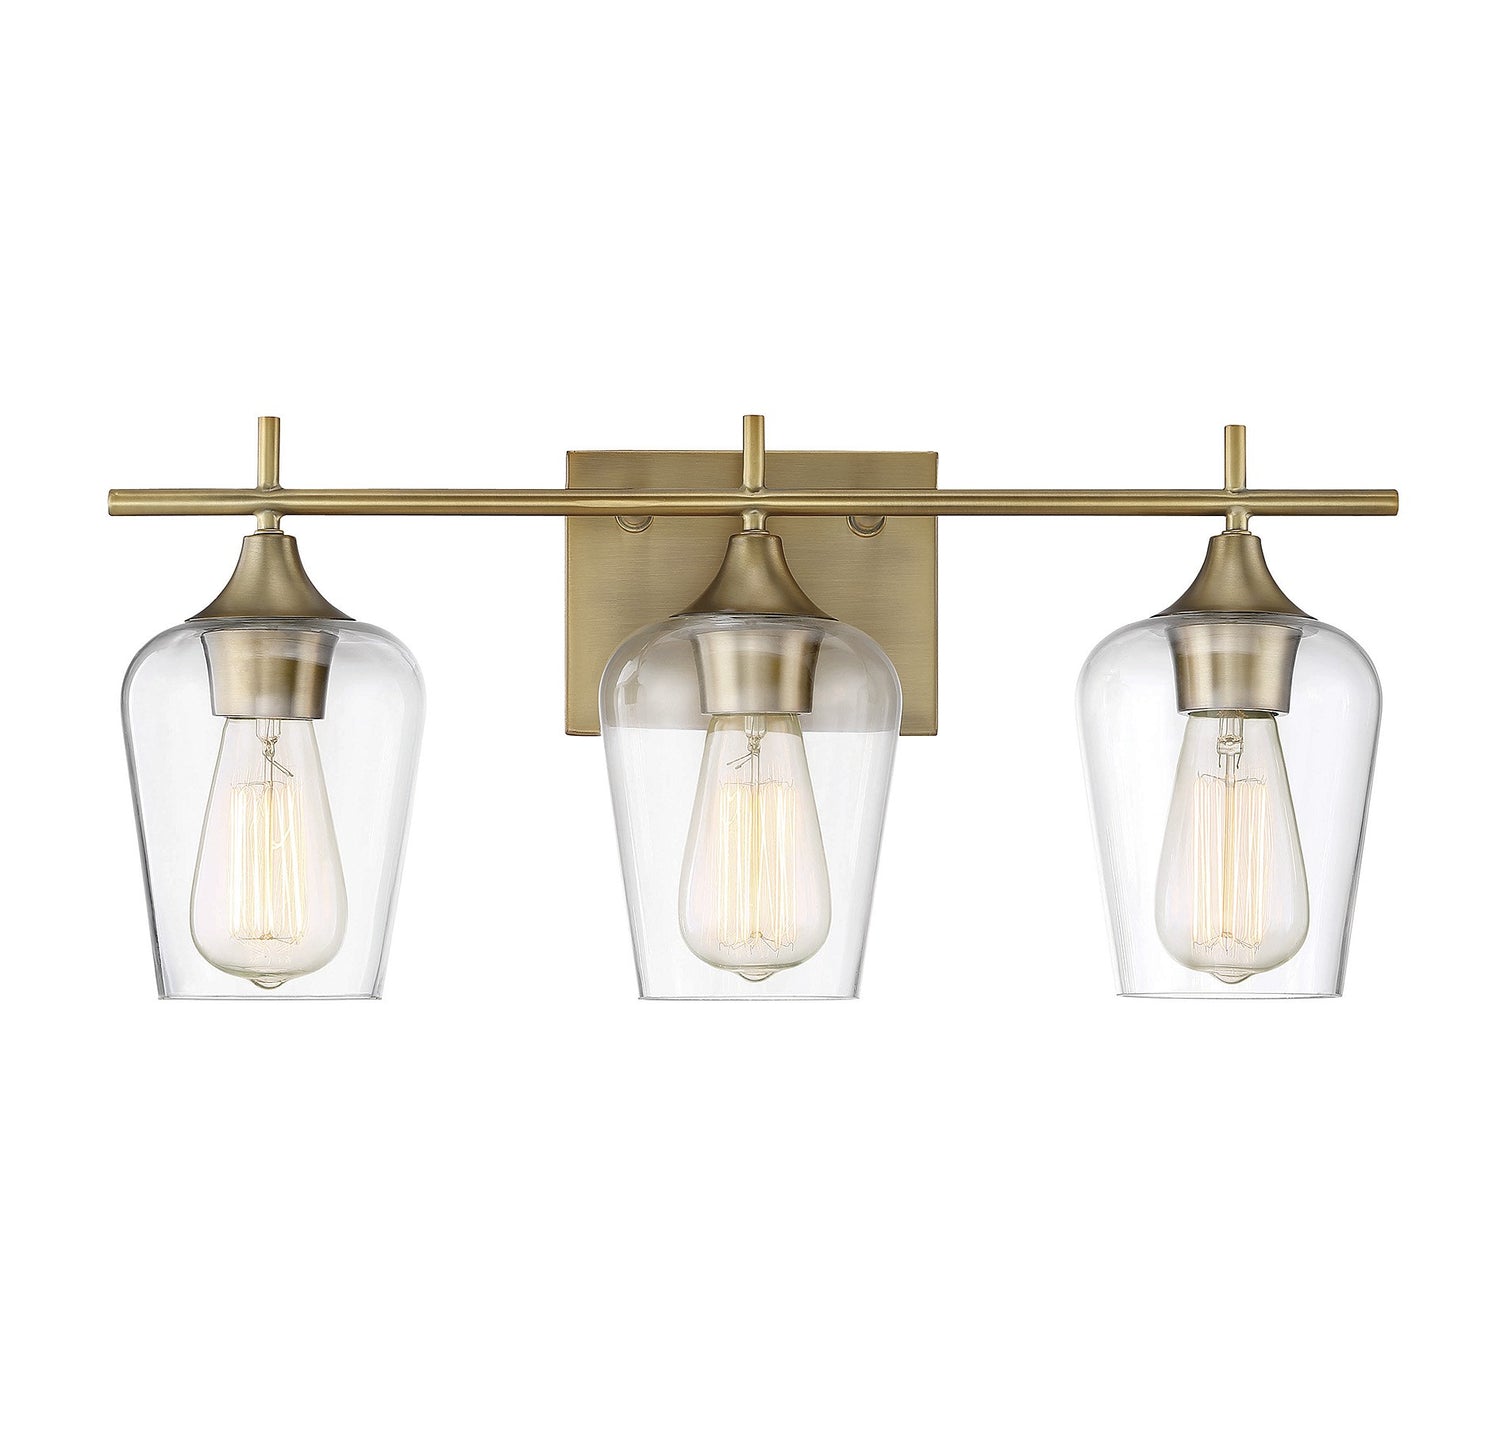 Octave 3 Light Vanity in Warm Brass with Clear Glass Shades by Savoy House 8-4030-3-322